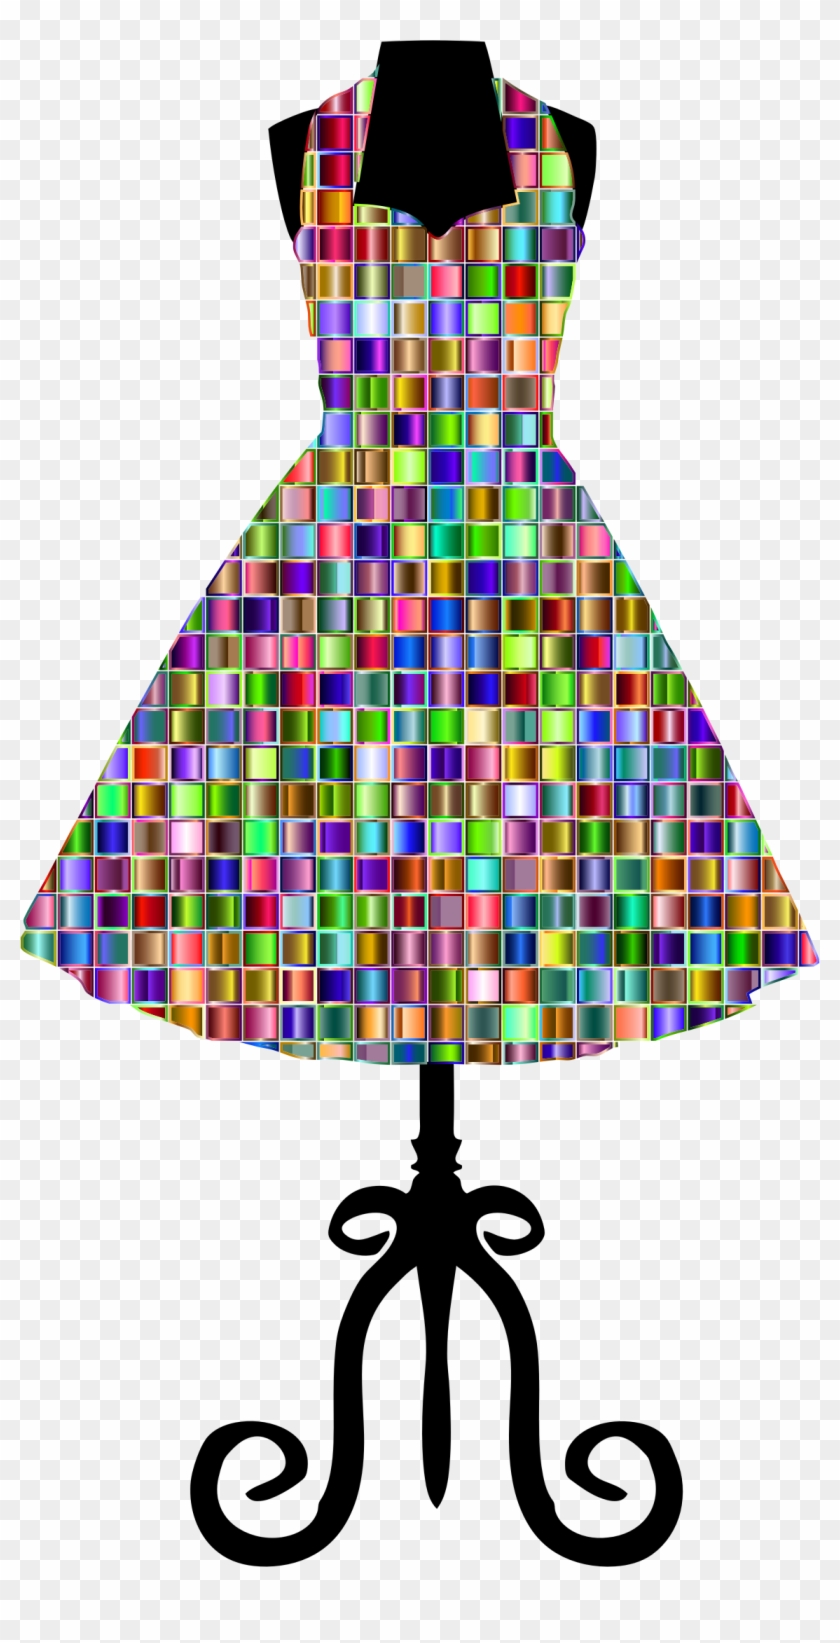 This Free Icons Png Design Of Chromatic Mosaic 1950s - Dress Icon Png #221447